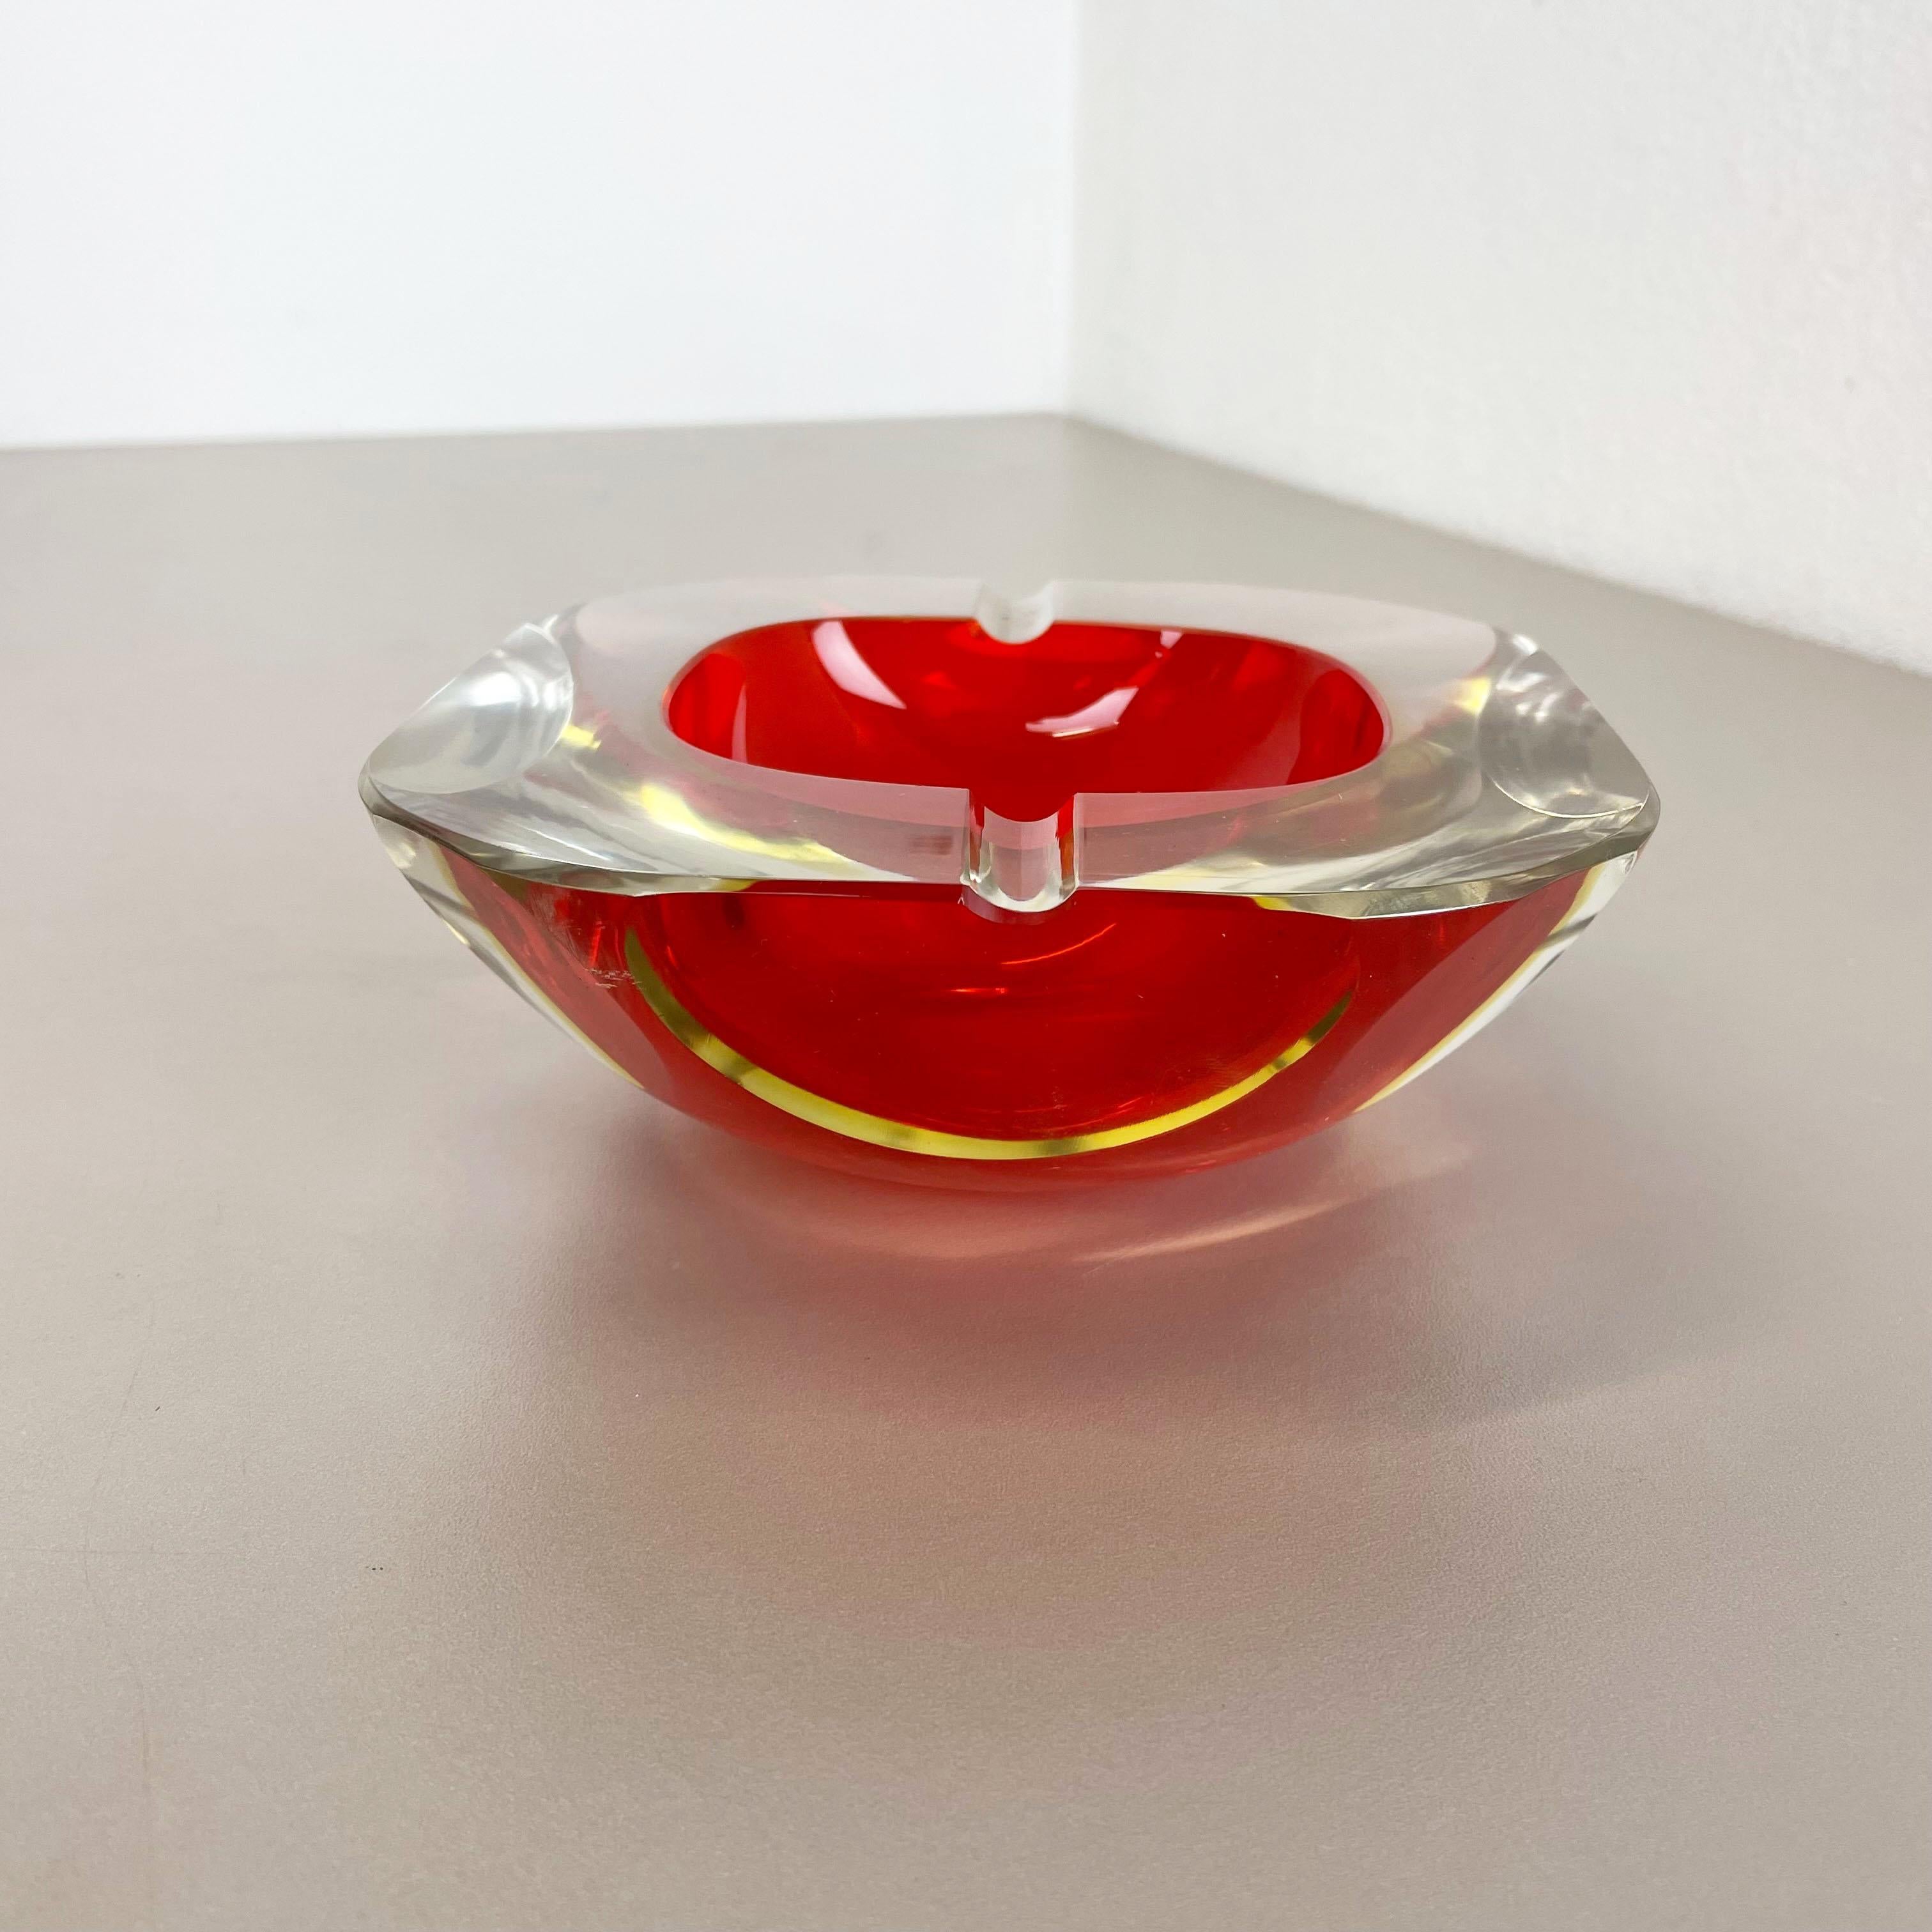 Mid-Century Modern 1, 6 kg Murano Glass Faceted Sommerso Bowl Element Ashtray, Murano, Italy, 1970s For Sale